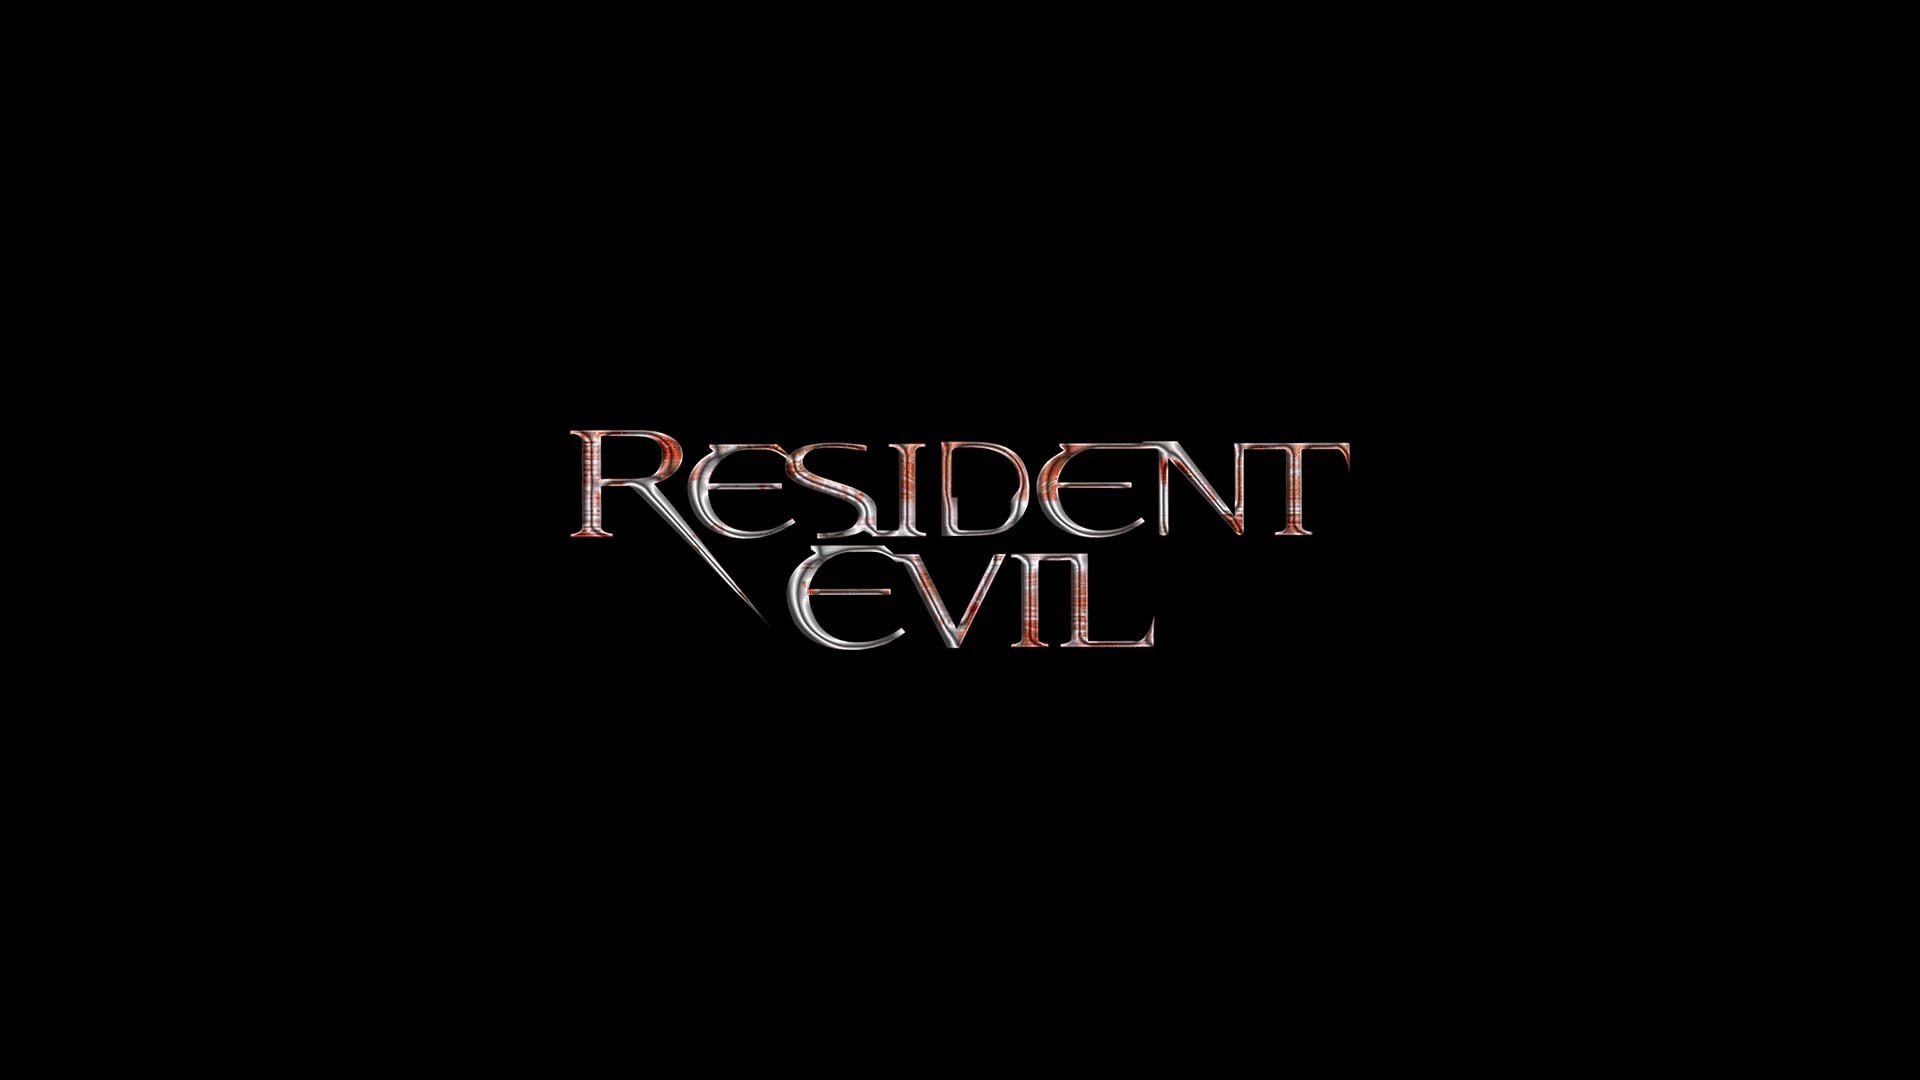 Download hd 1920x1080 Resident Evil Movie PC background ID:141155 for free